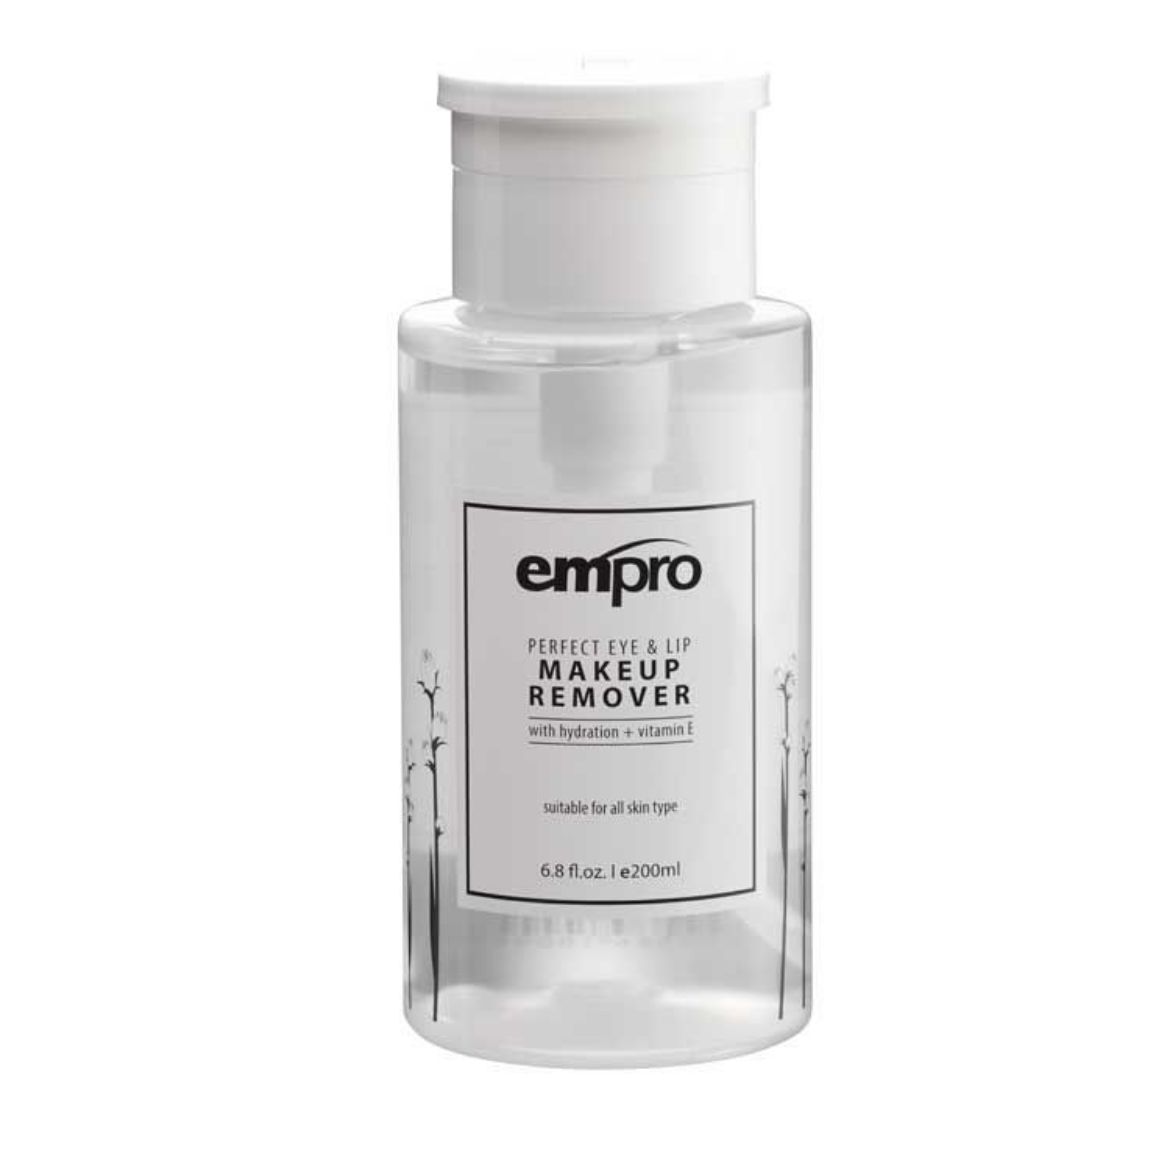 Image of Empro Perfect Eye & Lip Make-up Remover (200ml)